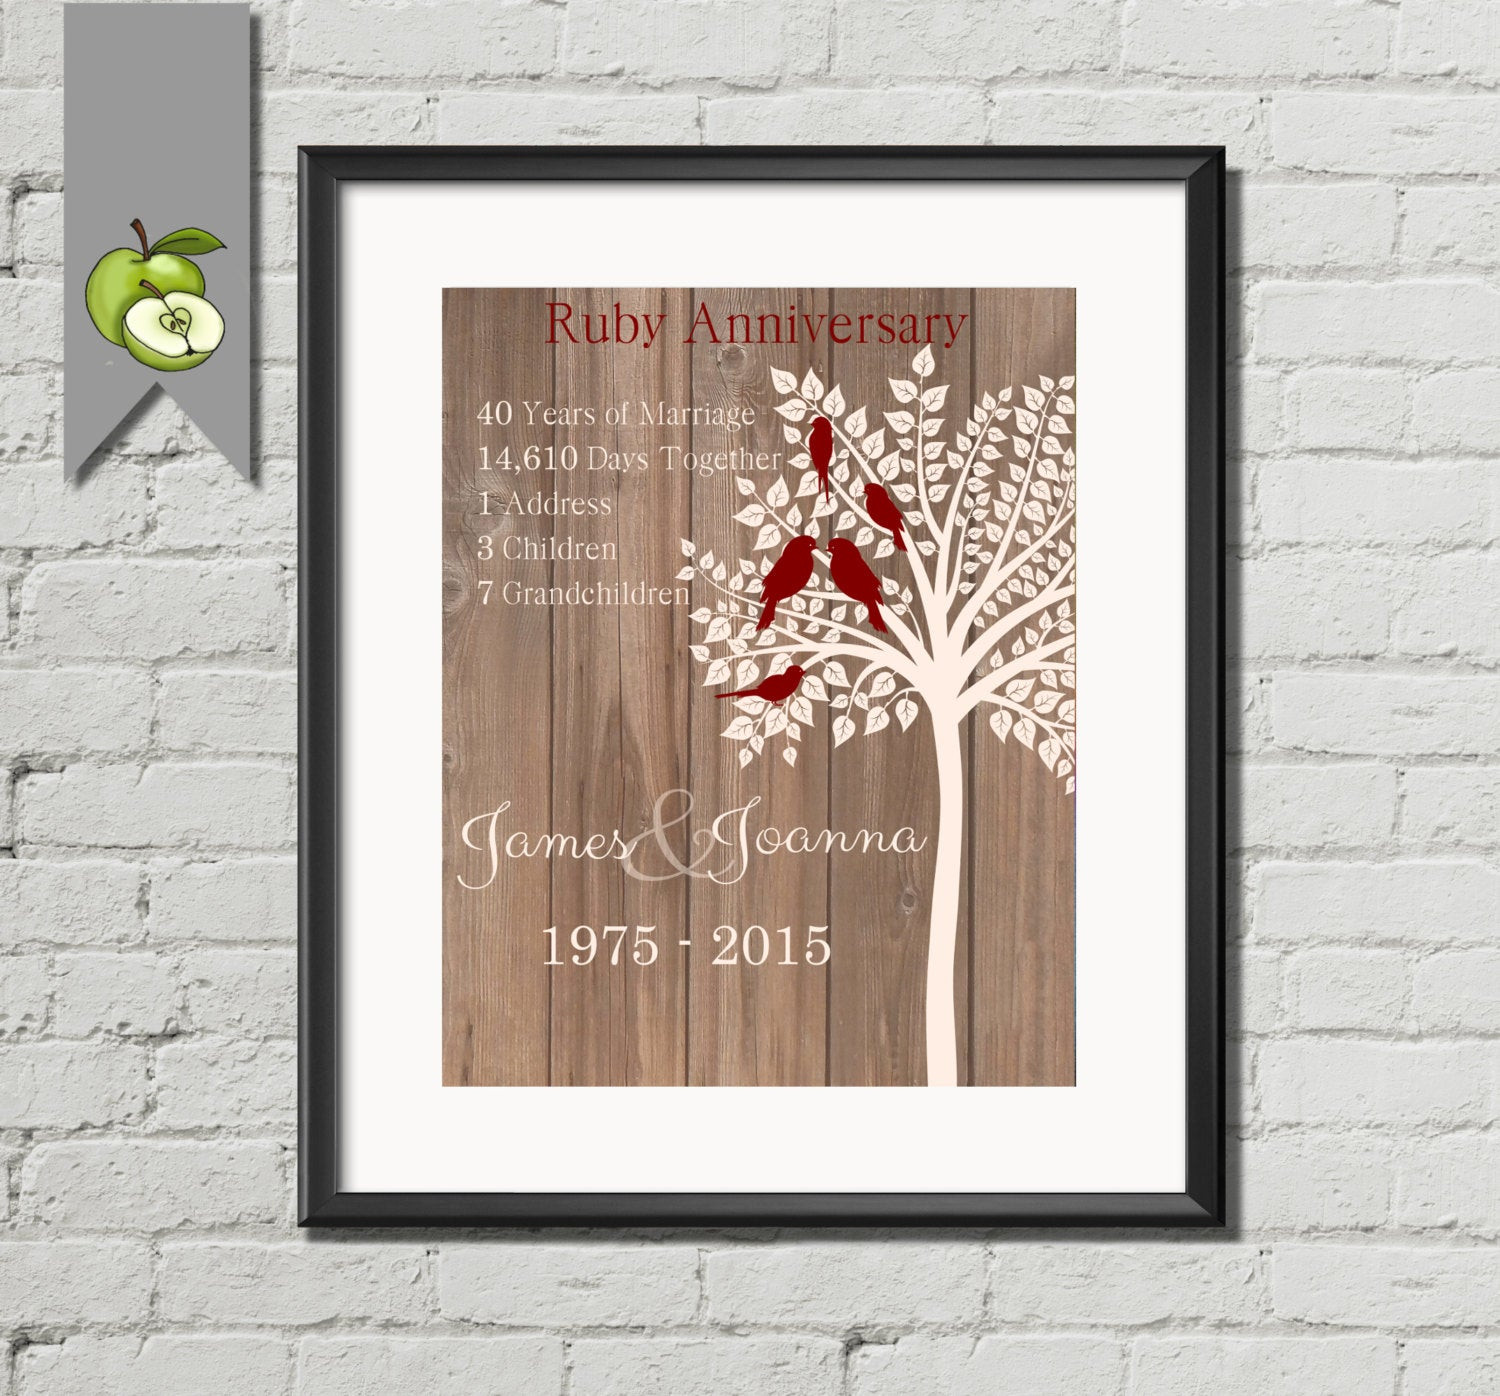 Ruby Anniversary Gift Ideas
 Ruby Wedding Anniversary Gift Personalised family tree